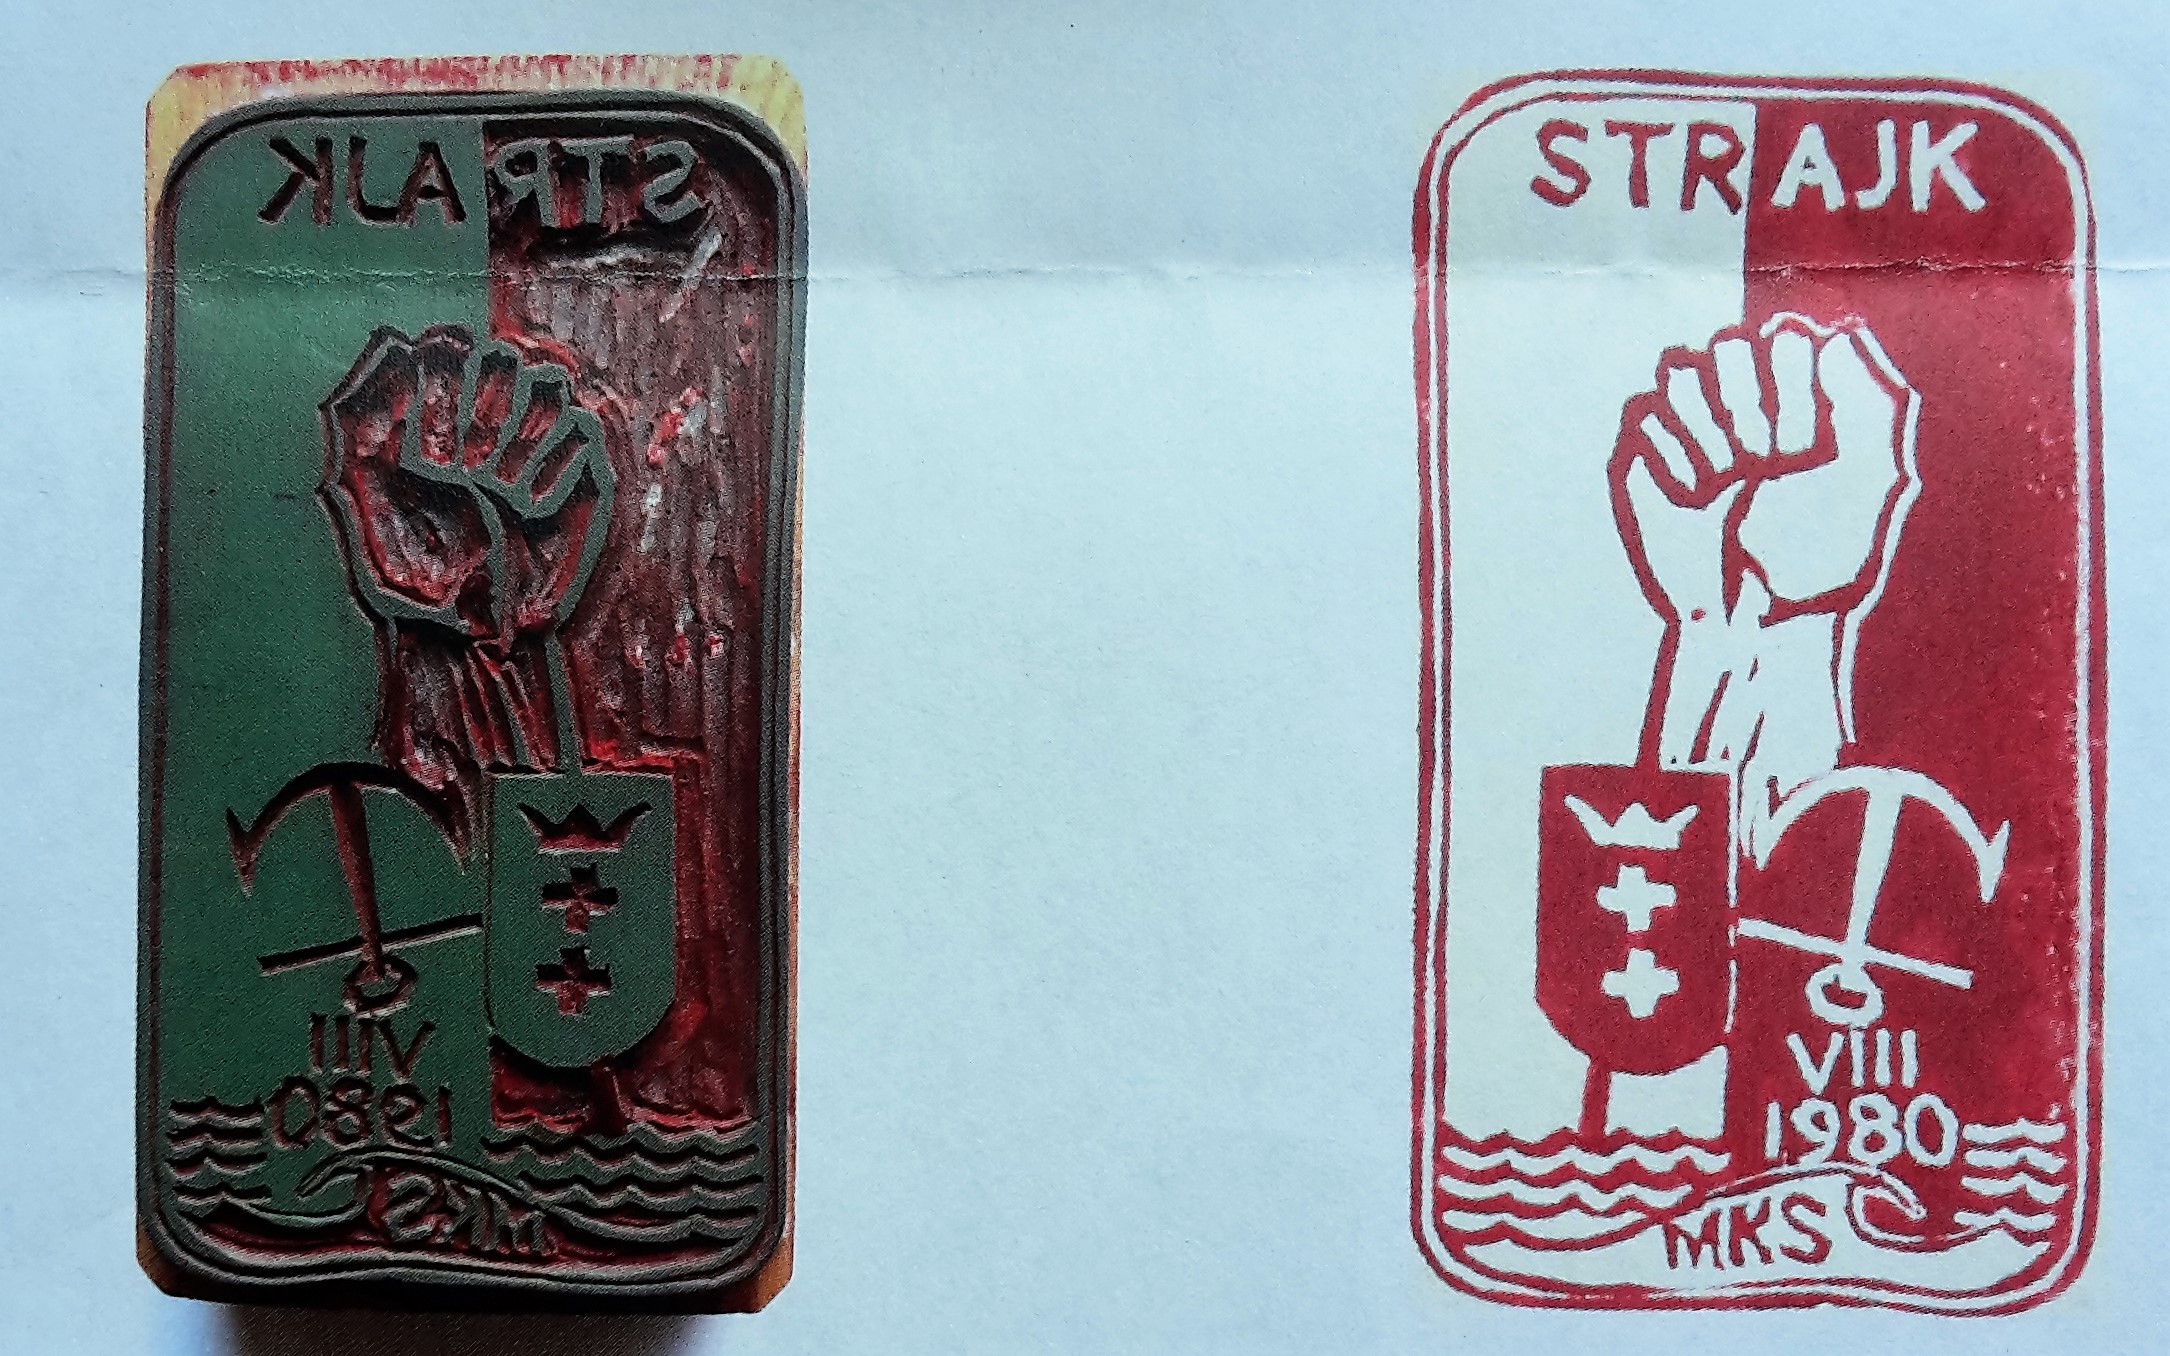 The first seal created by Józef Figiela in August 1980 during the strikes in the Gdansk Shipyard. The picture shows an original linocut and the copy in a form of the stamp.